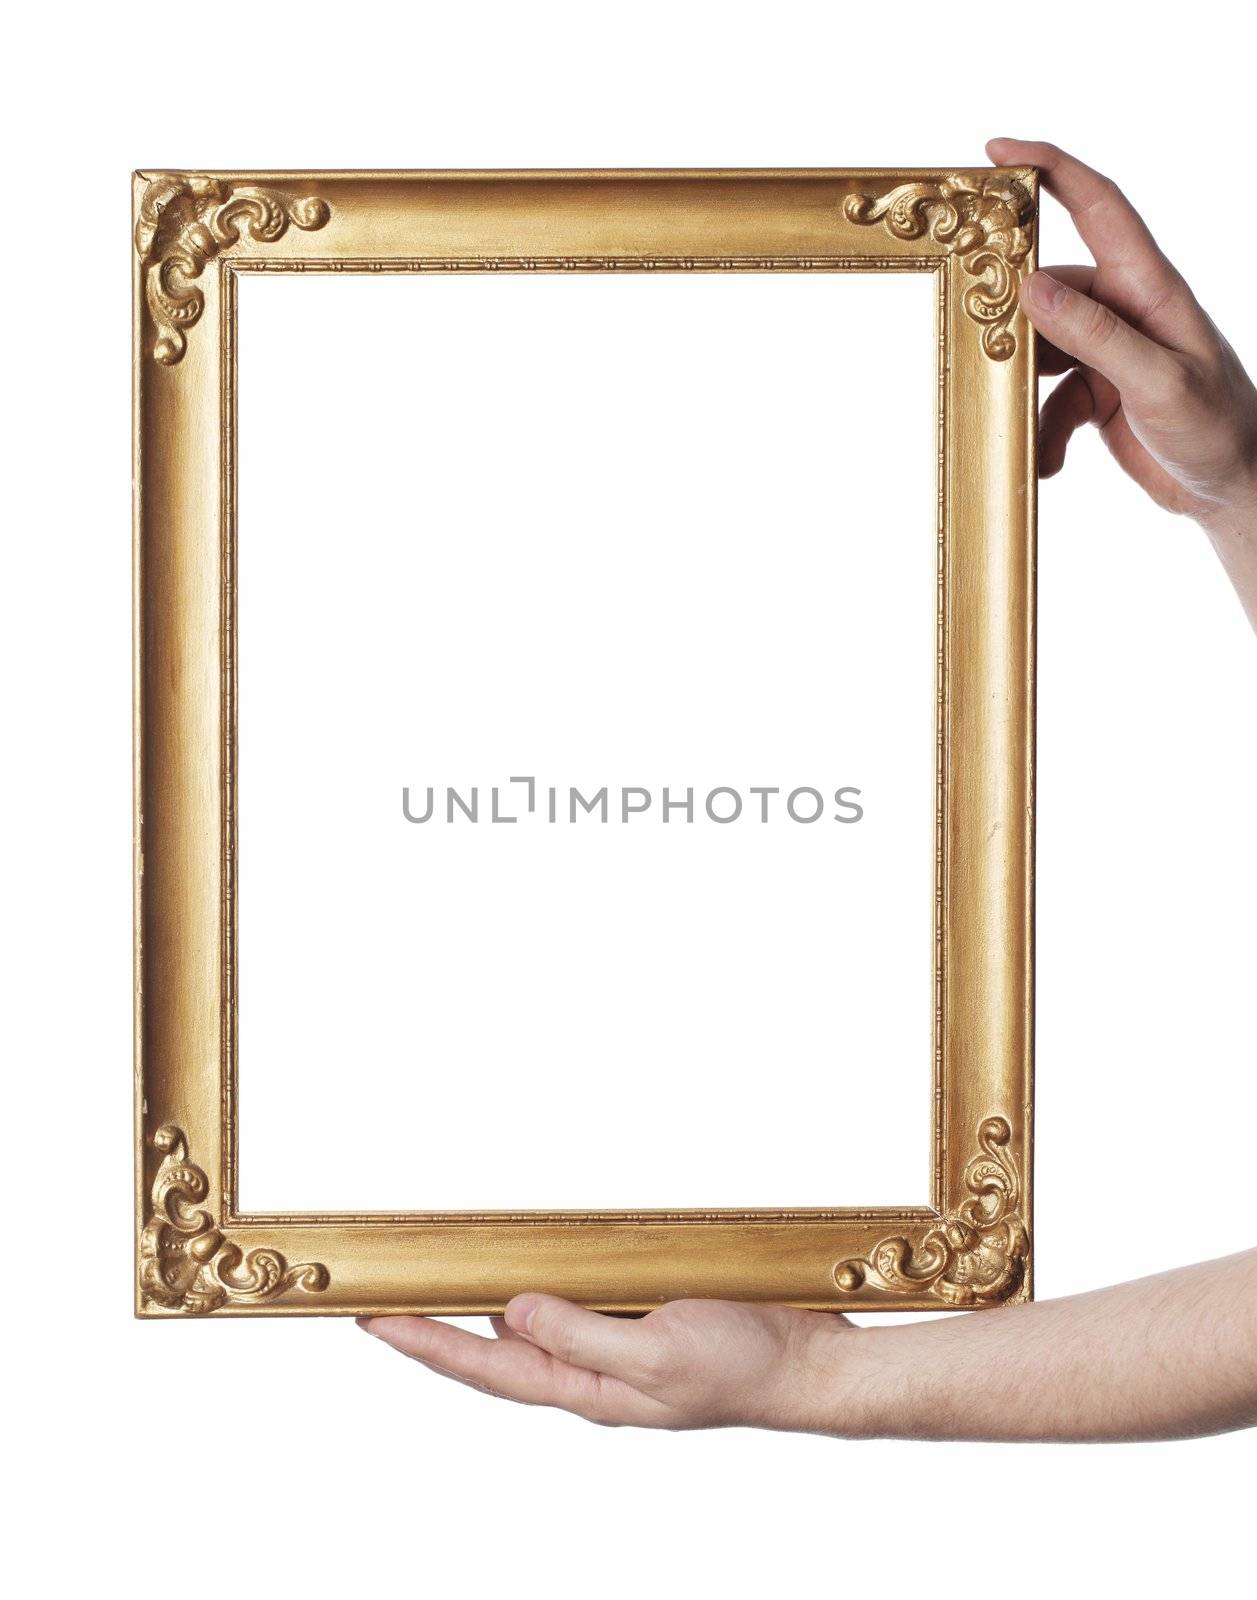 Man holding an old picture frame